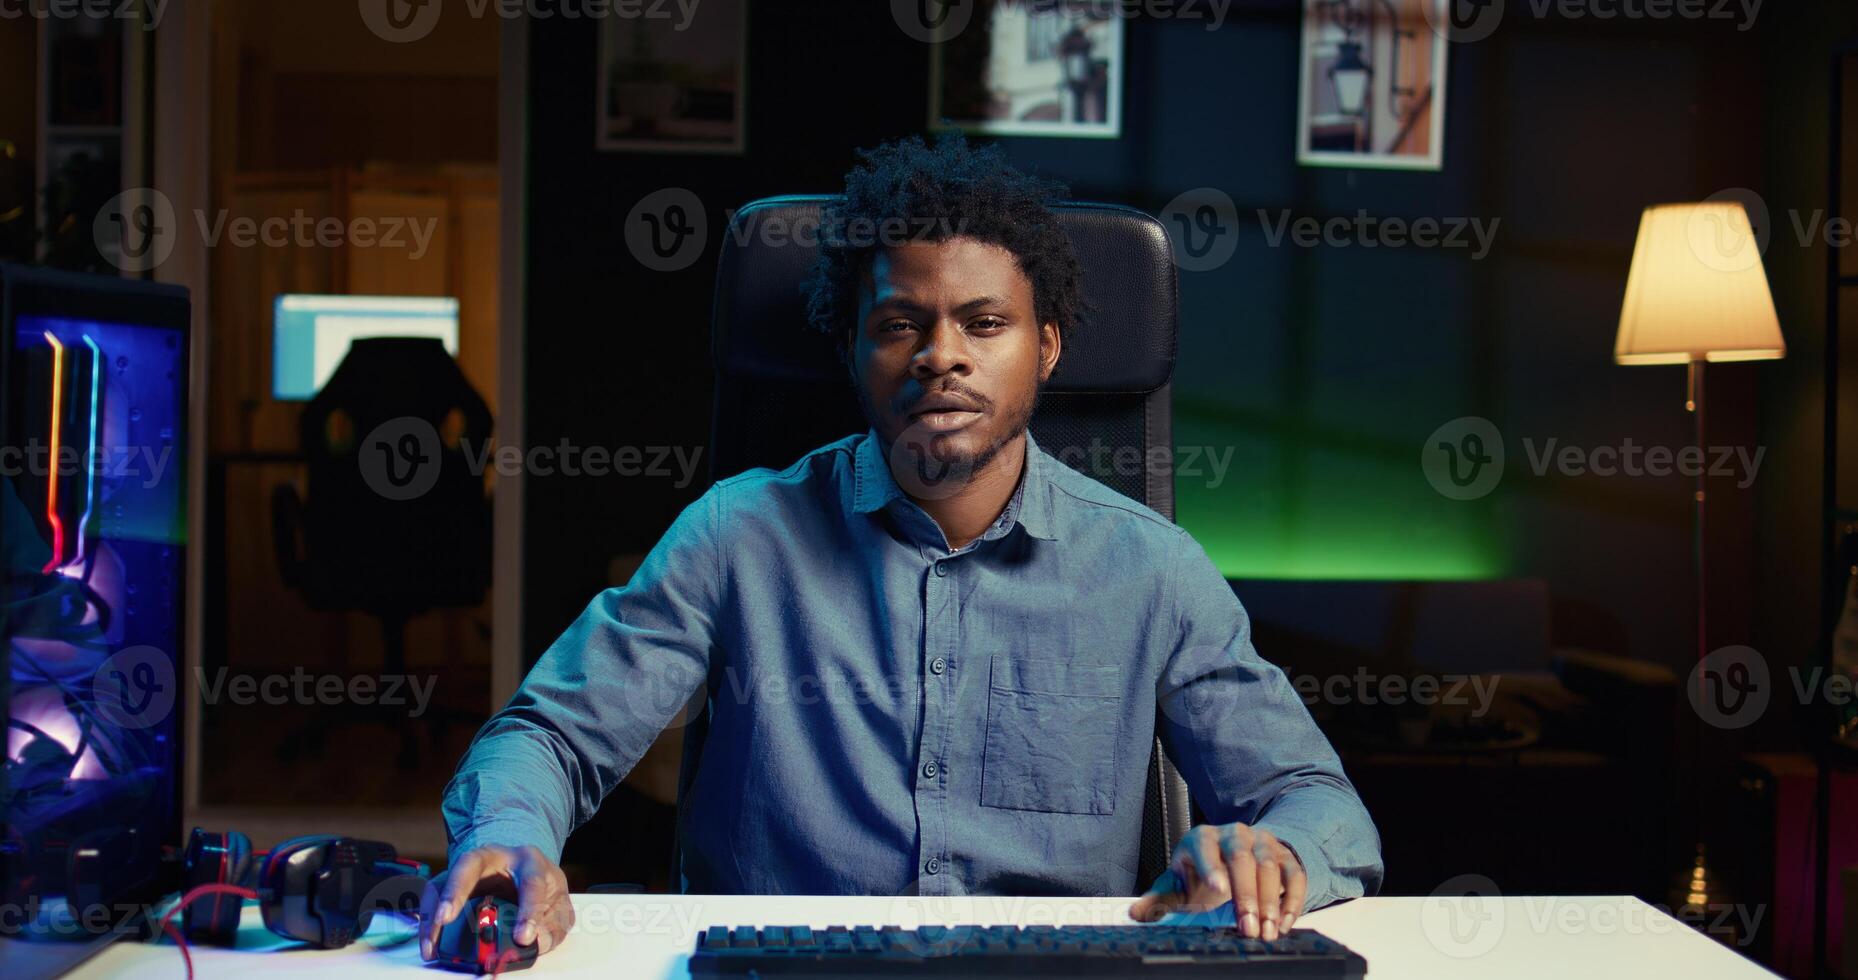 Man playing intense game on rgb lit computer desktop, spamming mouse and keyboard buttons to defeat enemies. Gamer in neon lit room focused on competitive videogame on PC photo